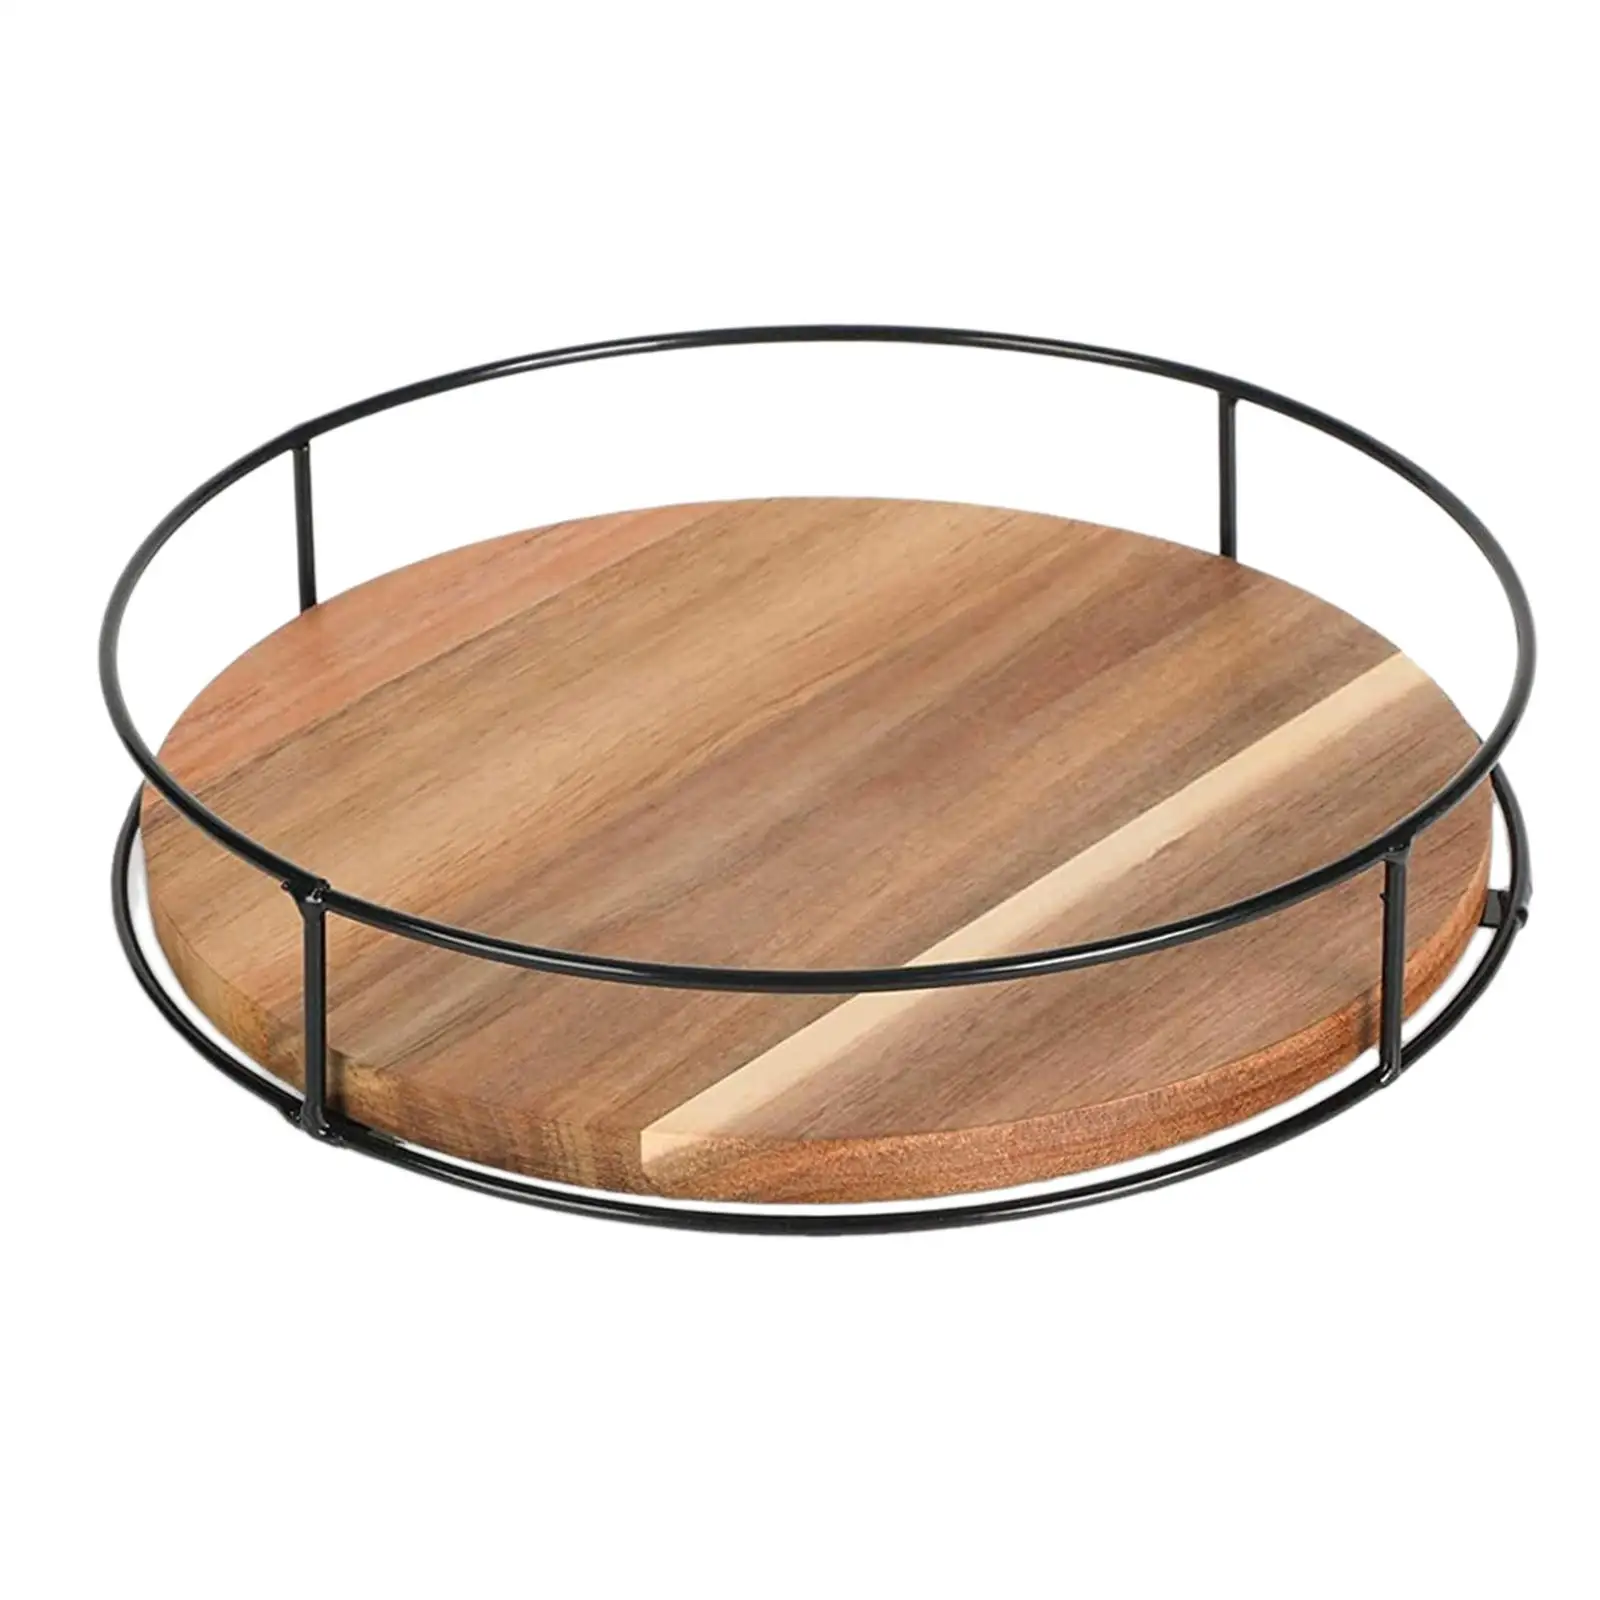 Turntable Tray Decoration Rotary Vanity Tray Bread Tray Turntable Organizer for Countertop Bar Dining Room Table Cabinet